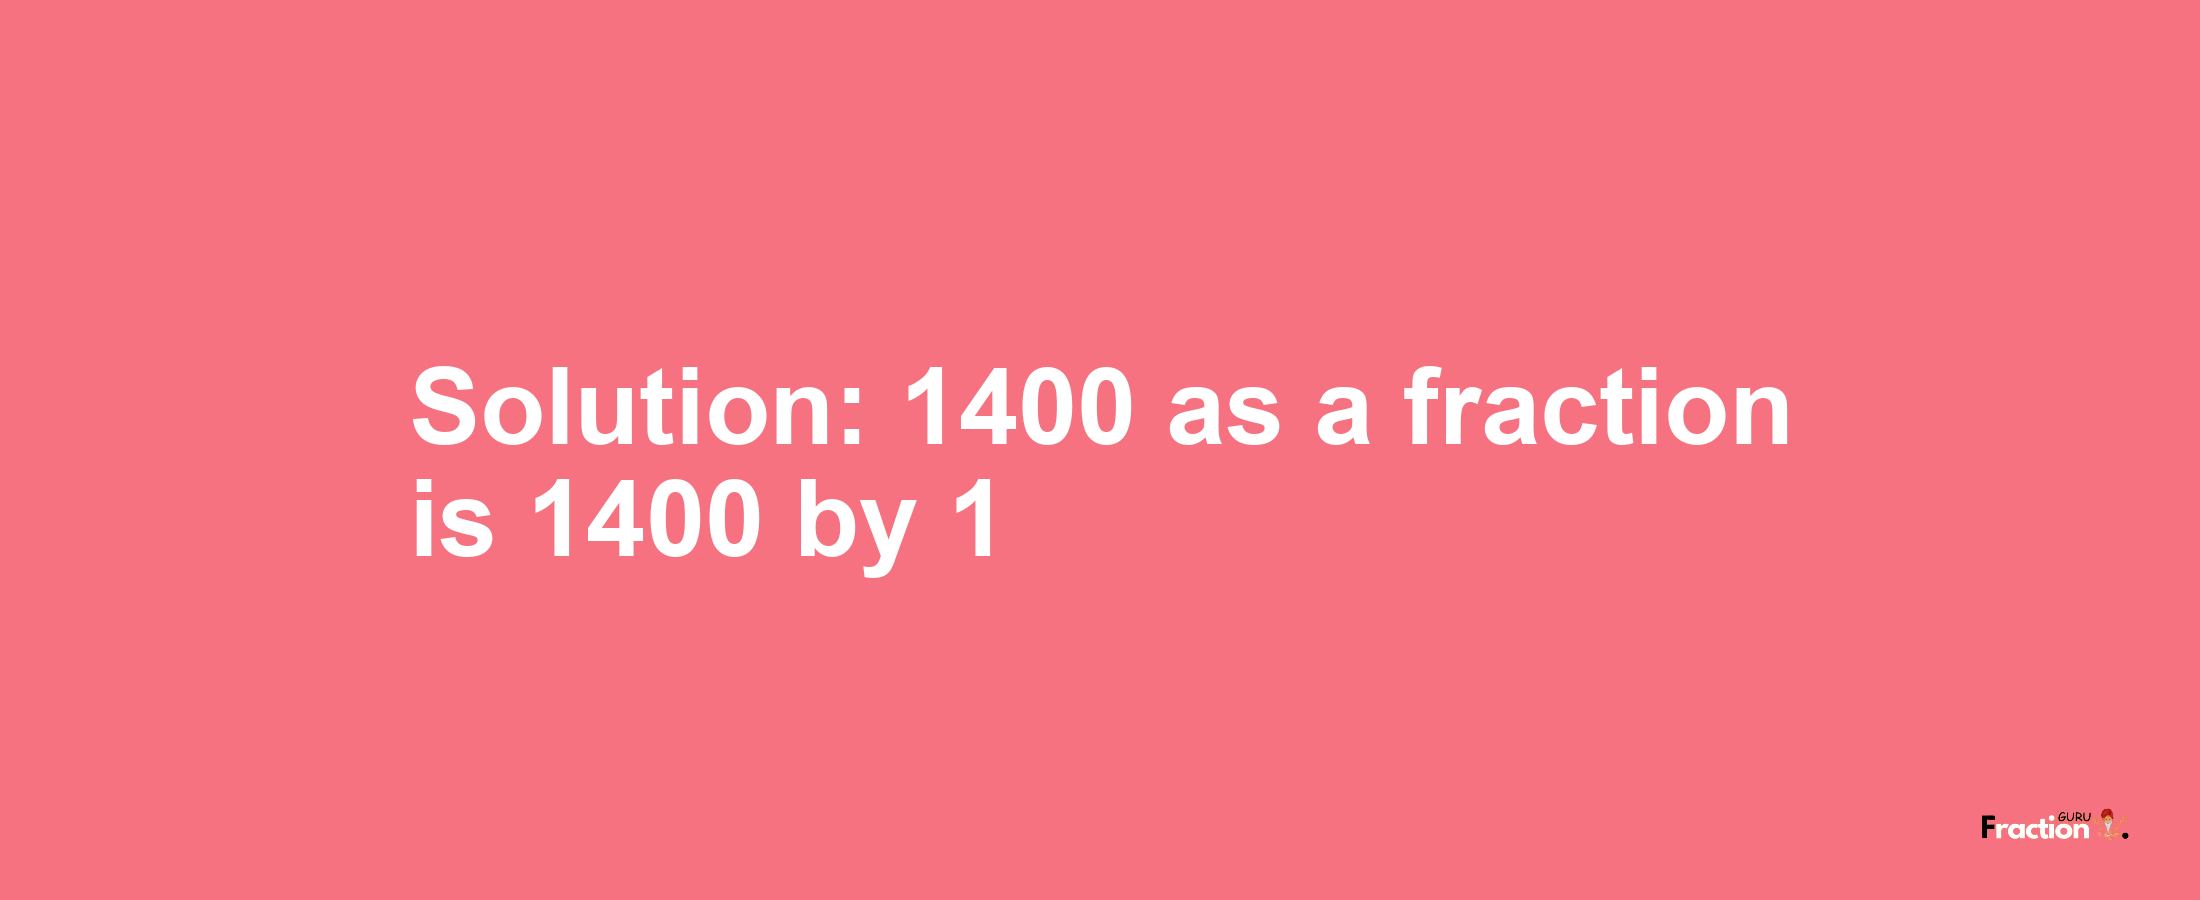 Solution:1400 as a fraction is 1400/1